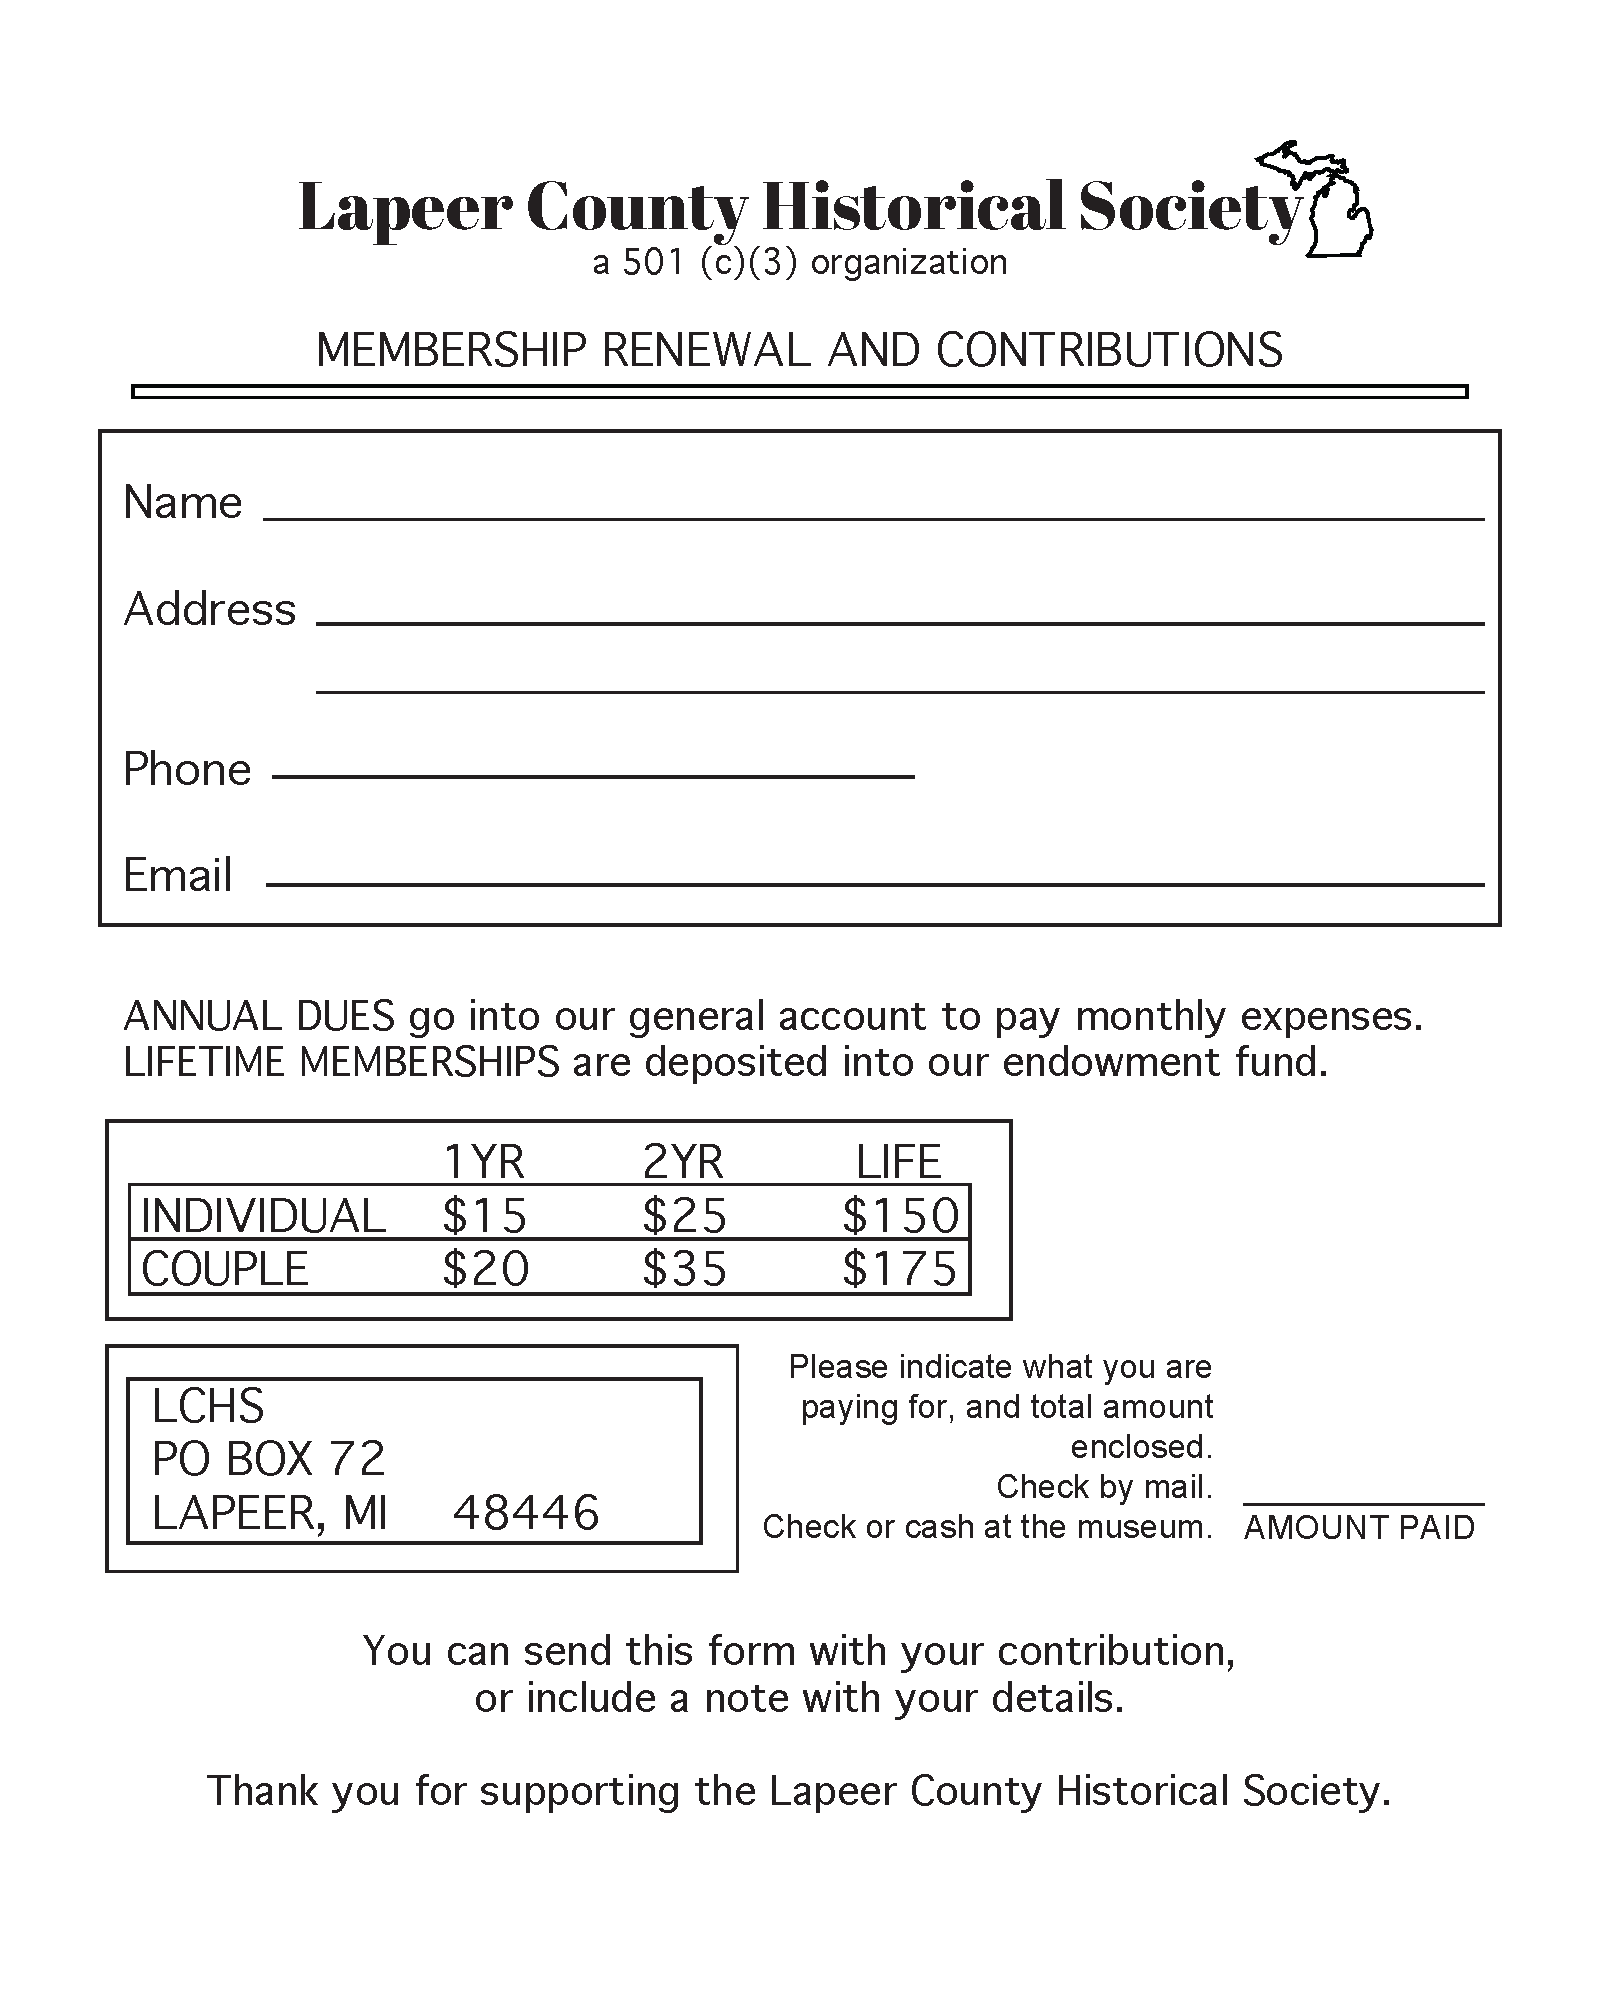 CLICK FOR PRINTABLE FORM